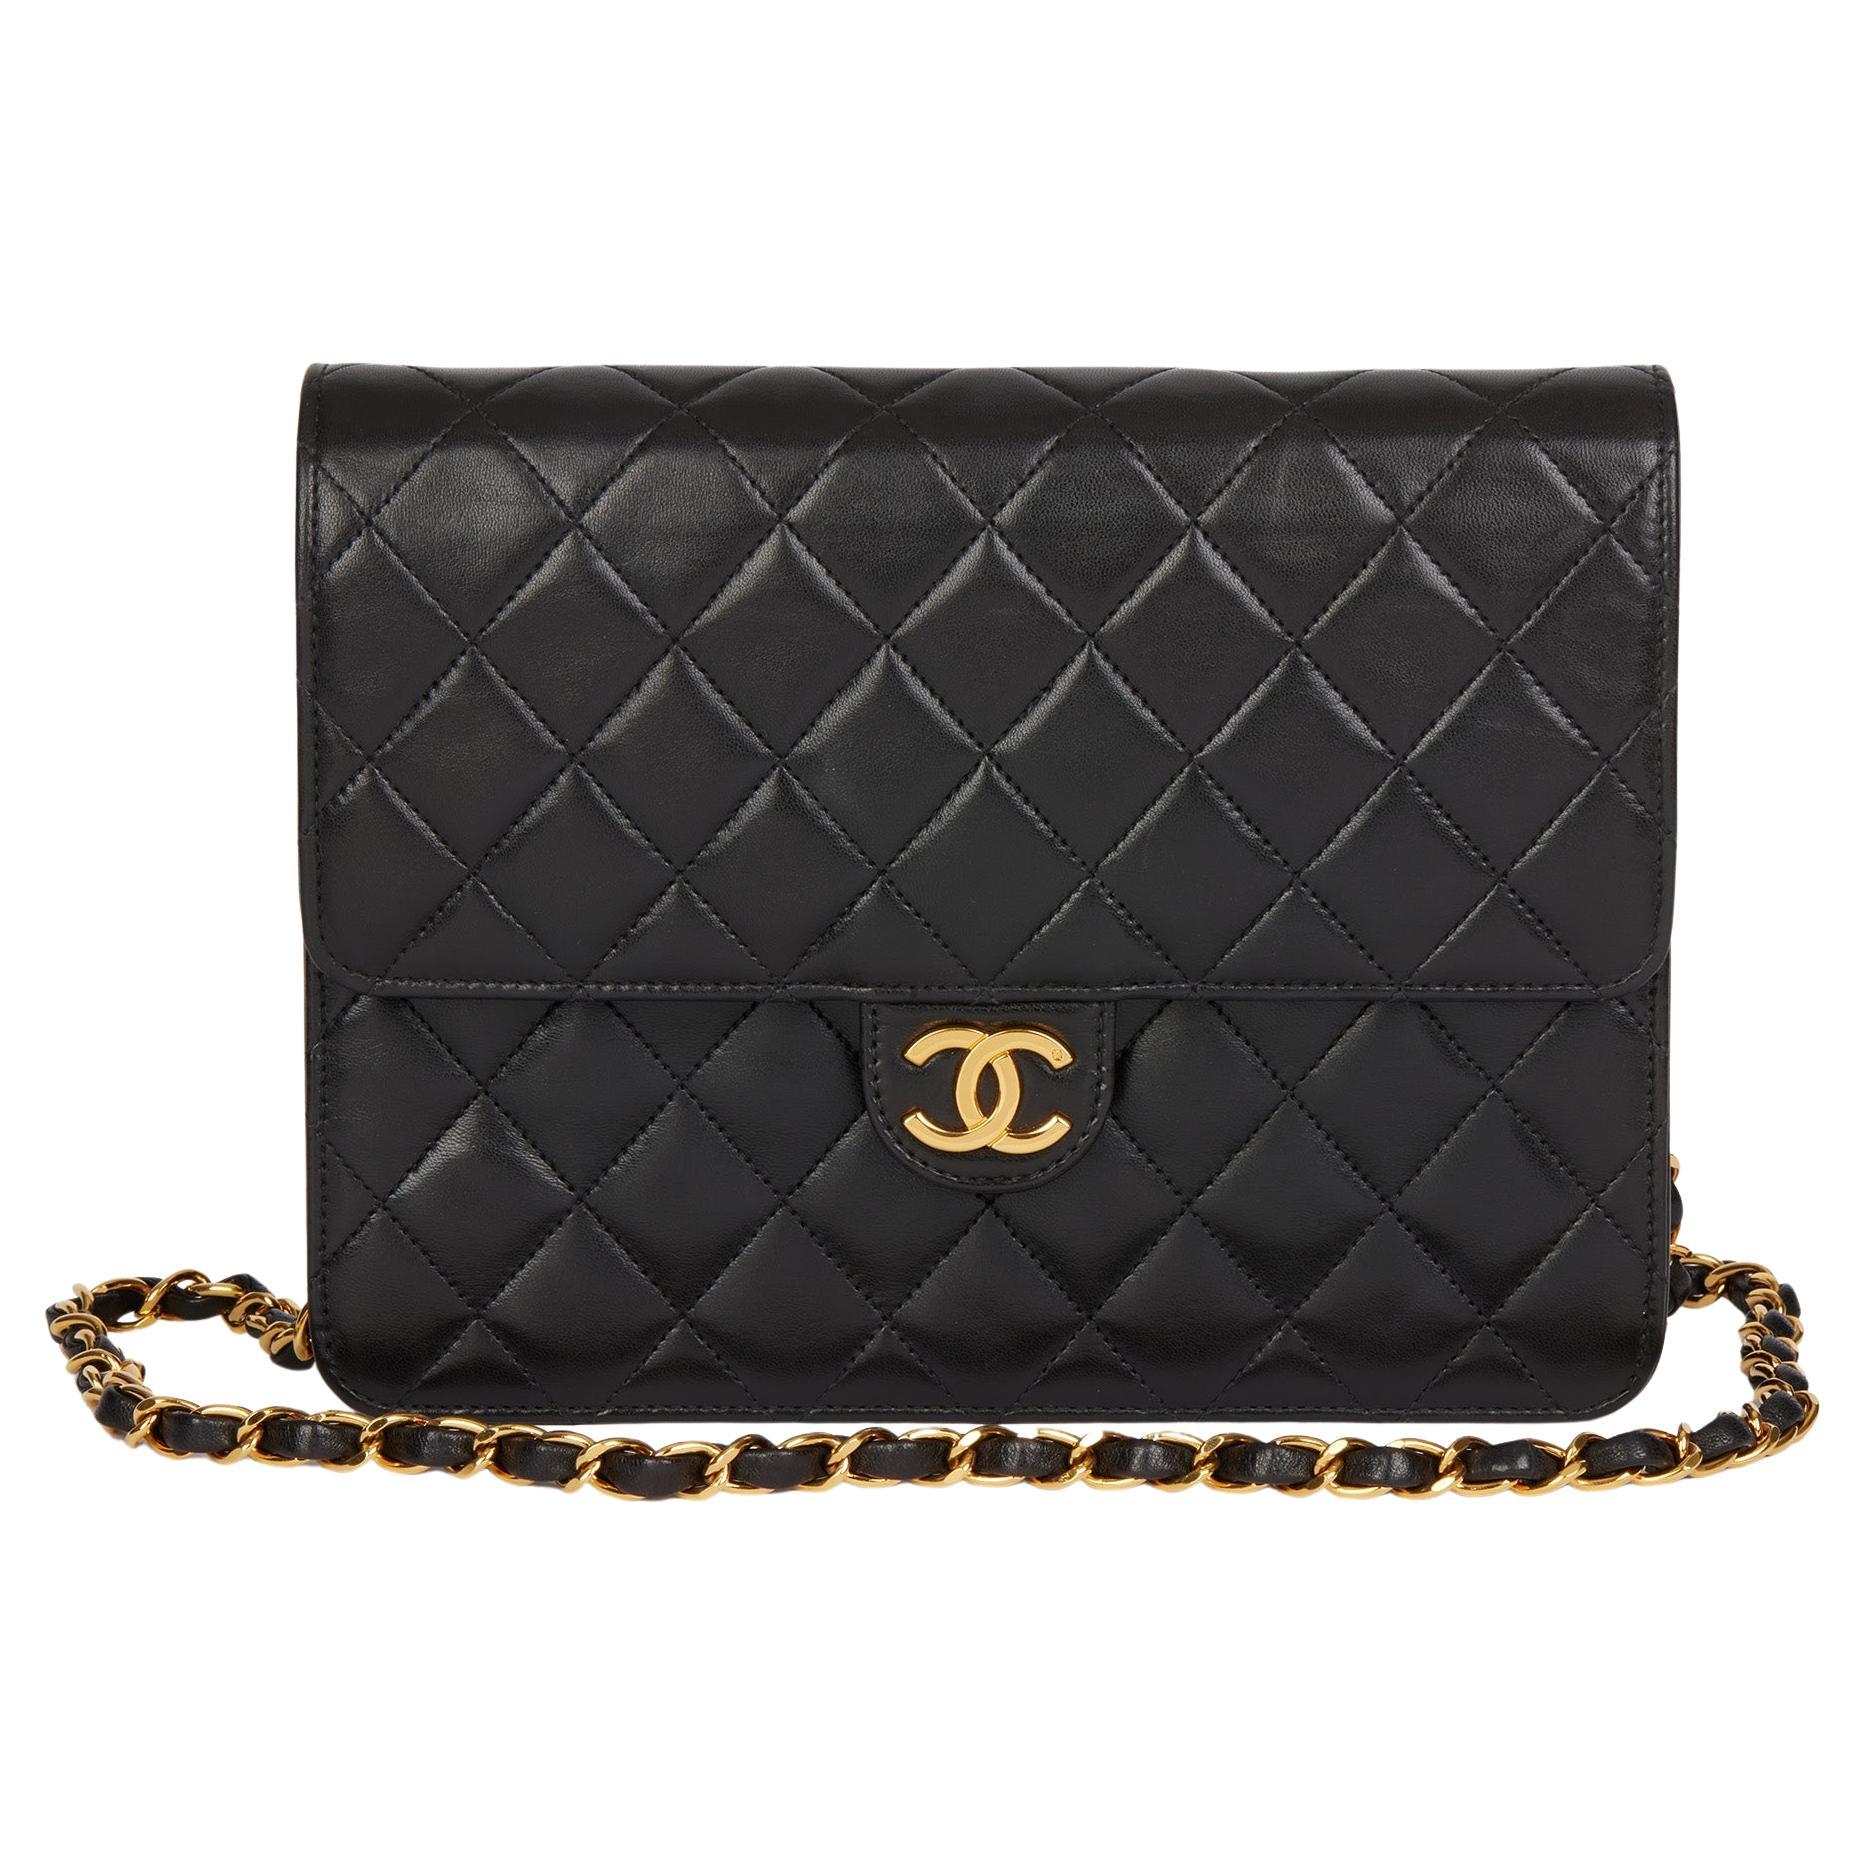 CHANEL Black Quilted Lambskin Vintage Small Classic Single Flap